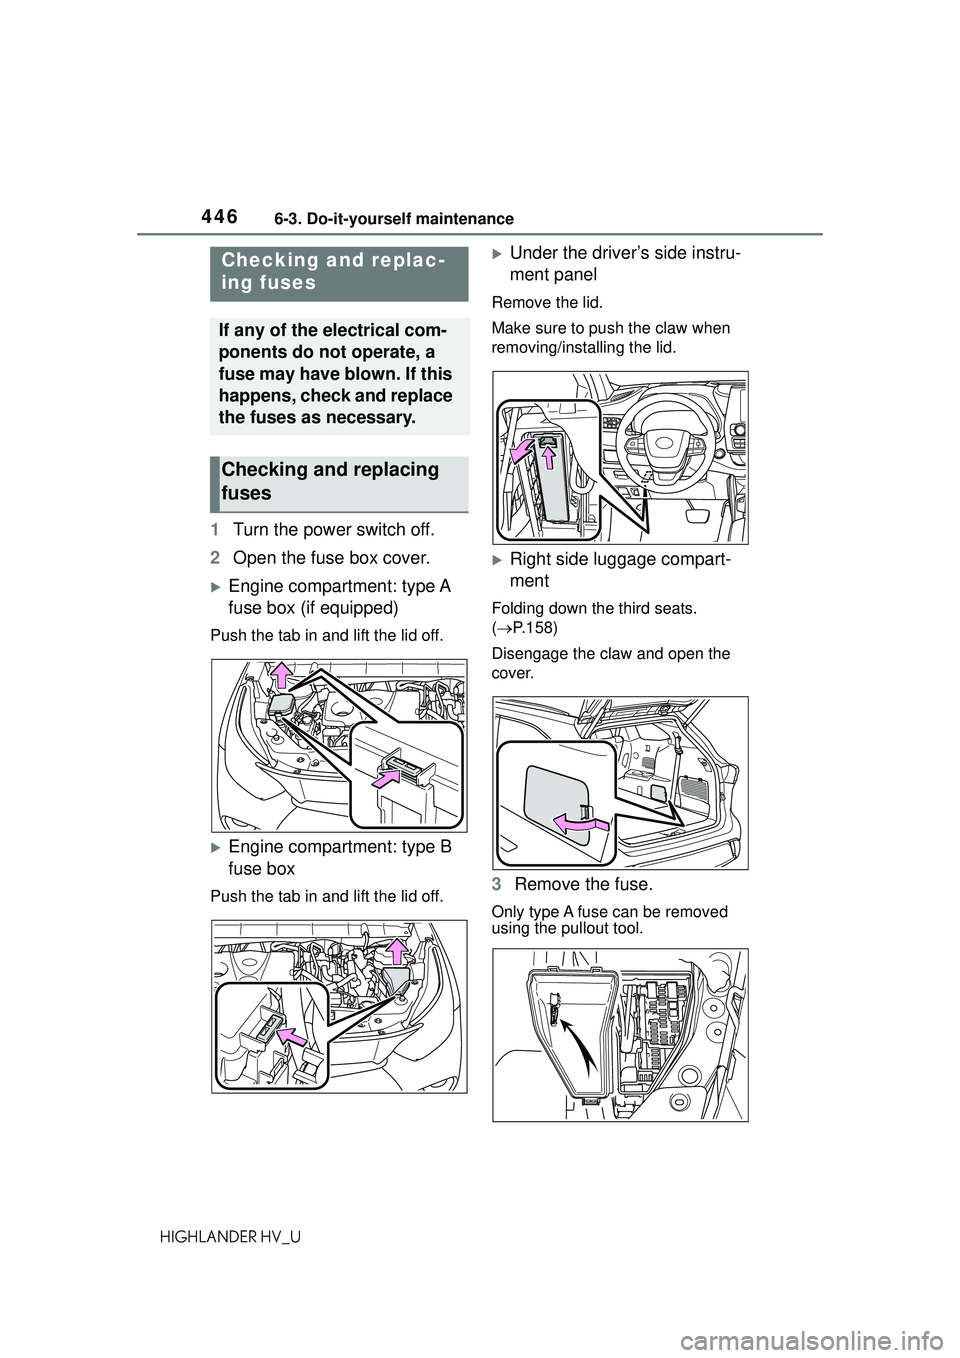 TOYOTA HIGHLANDER HYBRID 2021  Owners Manual (in English) 4466-3. Do-it-yourself maintenance
HIGHLANDER HV_U
1Turn the power switch off.
2 Open the fuse box cover.
Engine compartment: type A 
fuse box (if equipped)
Push the tab in and lift the lid off.
�